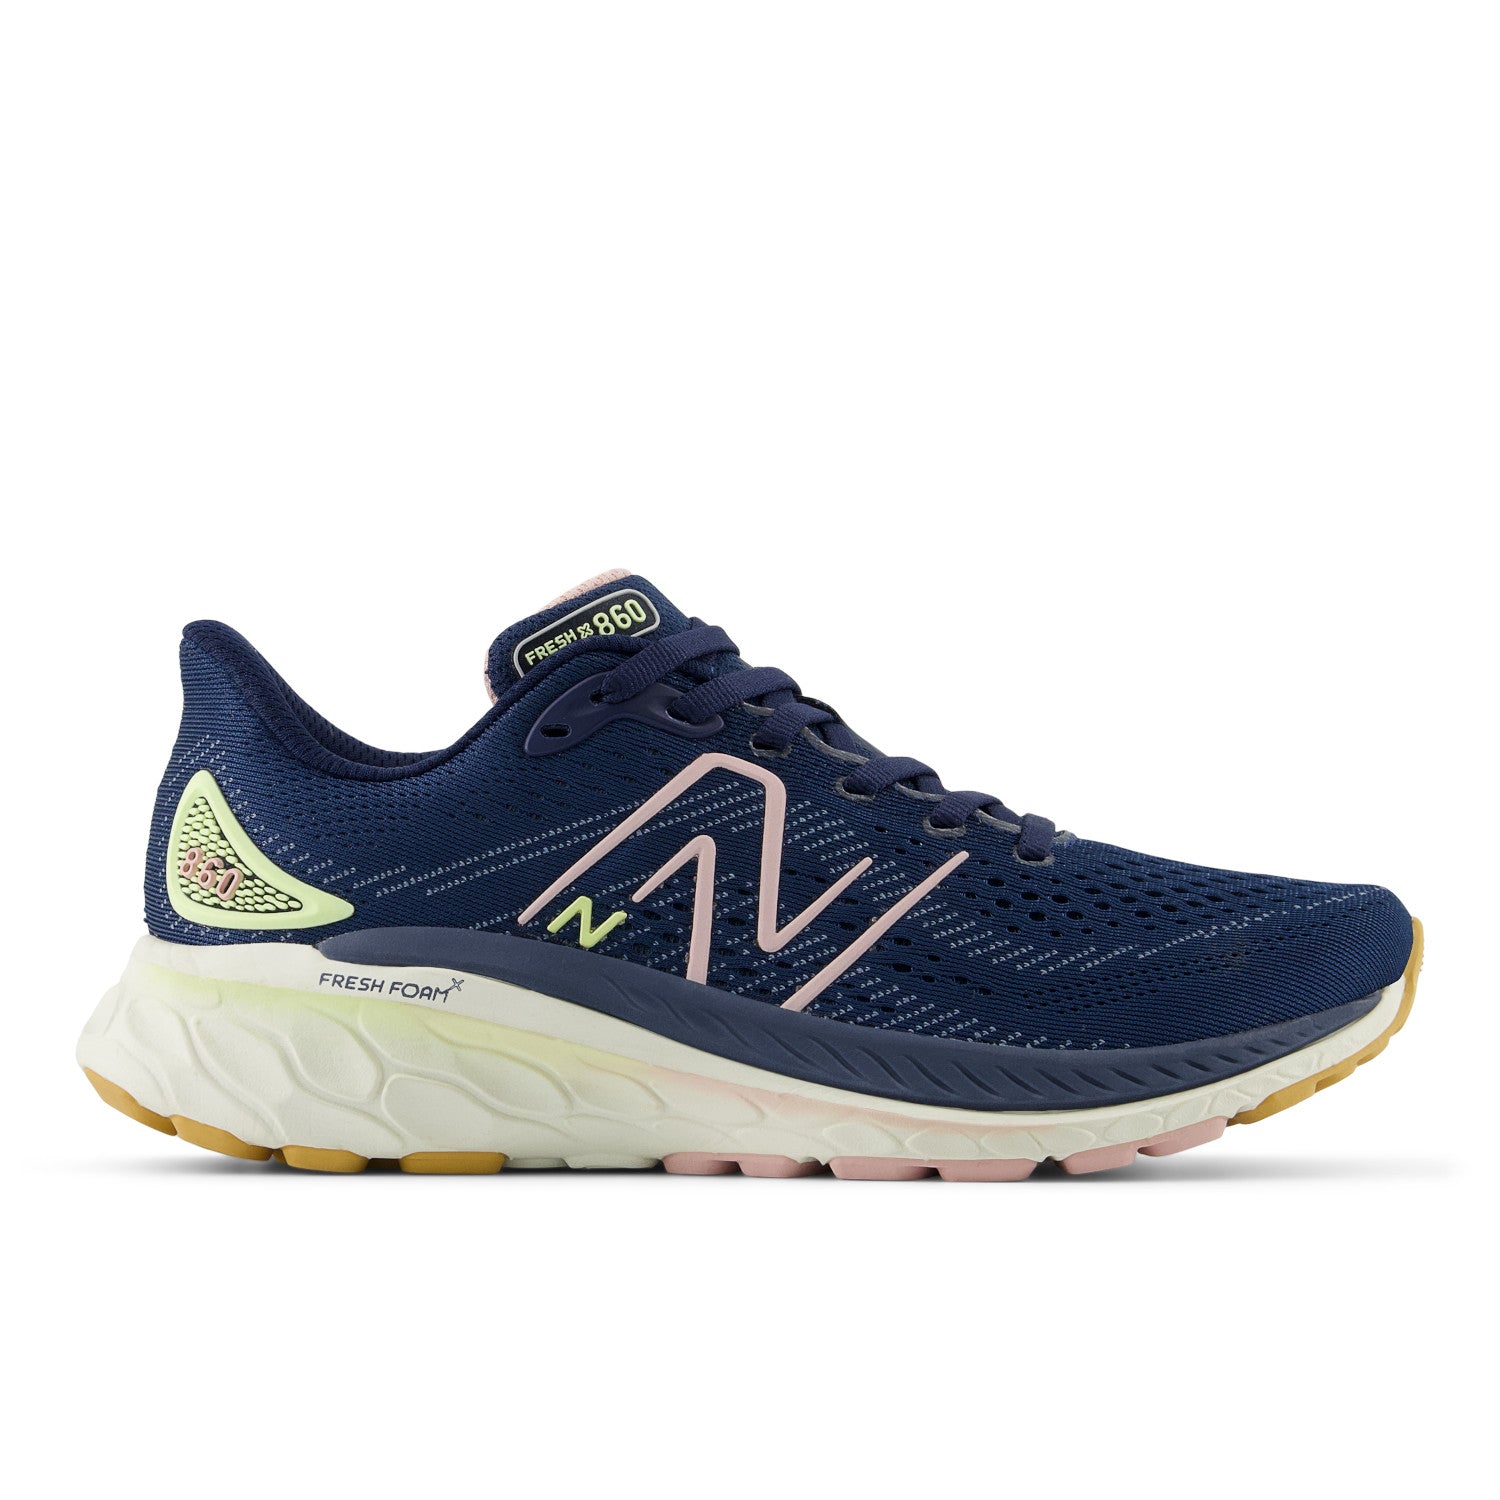 WOMEN'S 860 V13 - B - 13A NB NAVY | Performance Running Outfitters